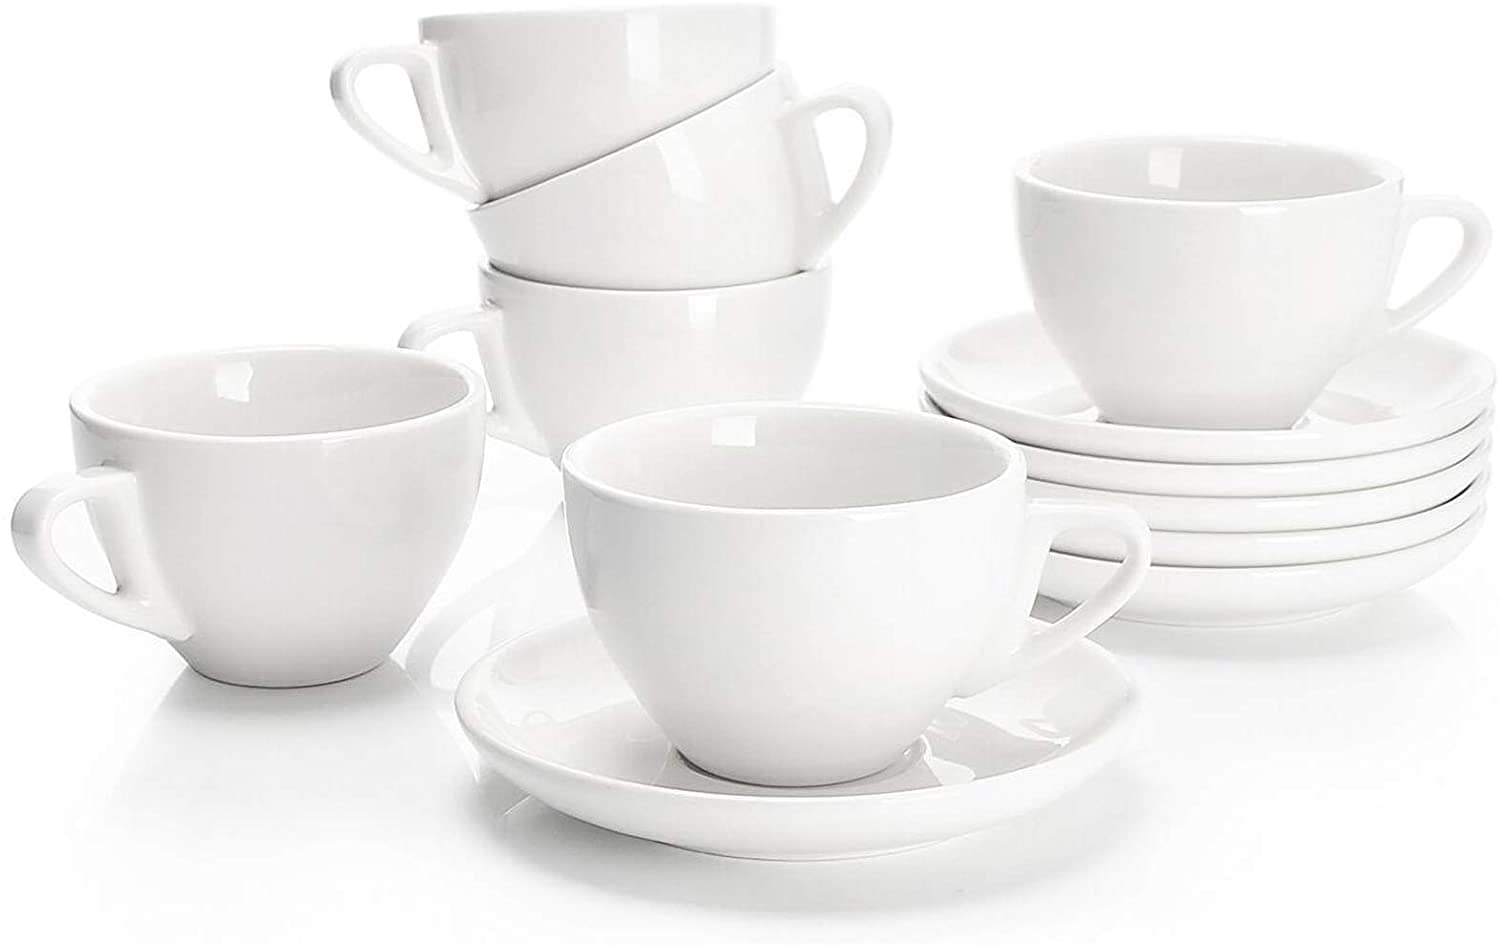 Kingrol 8 Ounces Cappuccino Cups with Saucers & Spoons, Porcelain Tea Cup  Set, Set of 6 Coffee Mugs …See more Kingrol 8 Ounces Cappuccino Cups with